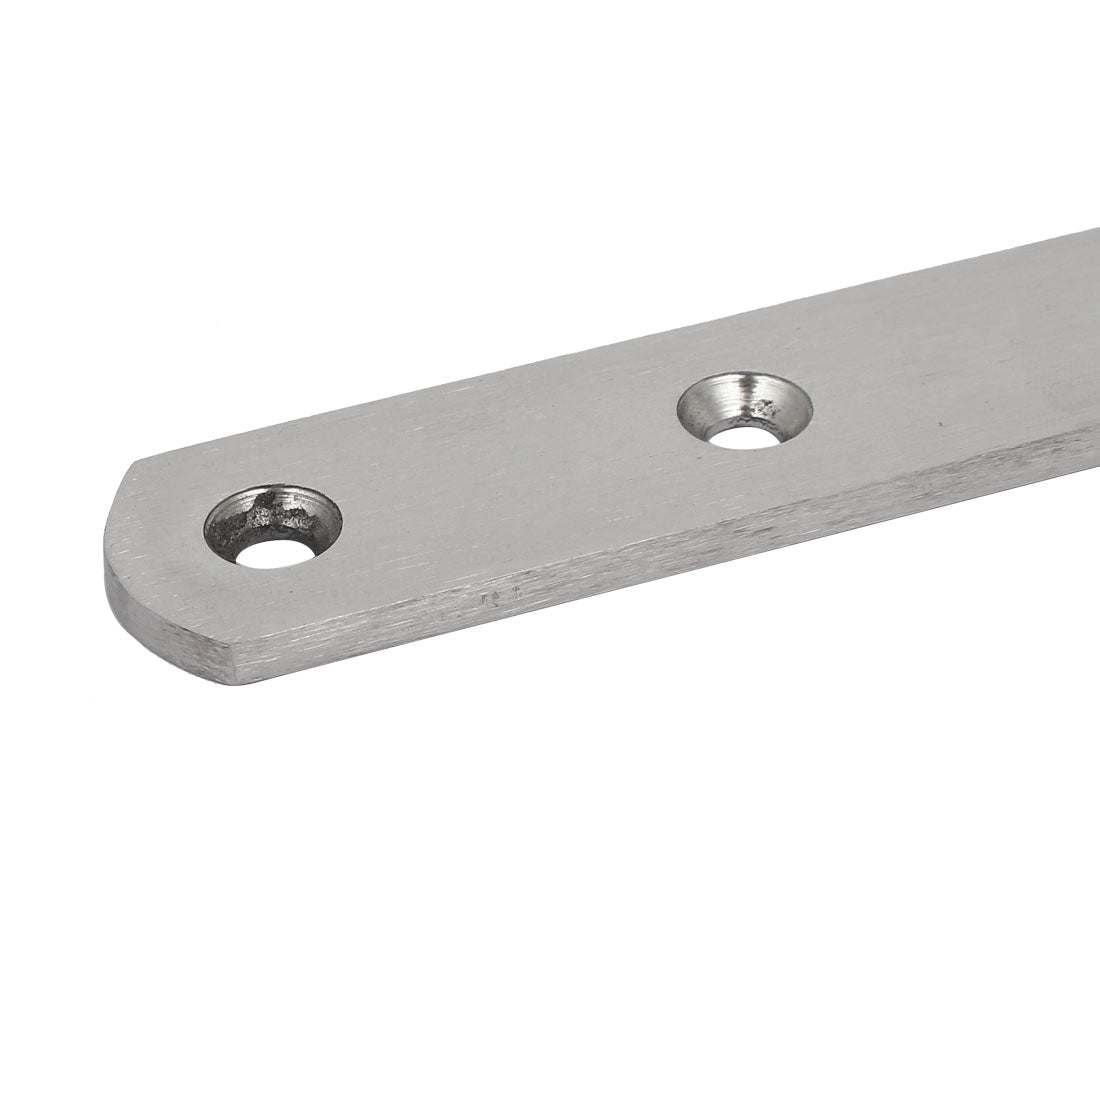 uxcell Uxcell 300mmx25mmx4mm Stainless Steel Straight Flat Fixing Mending Plate Bracket